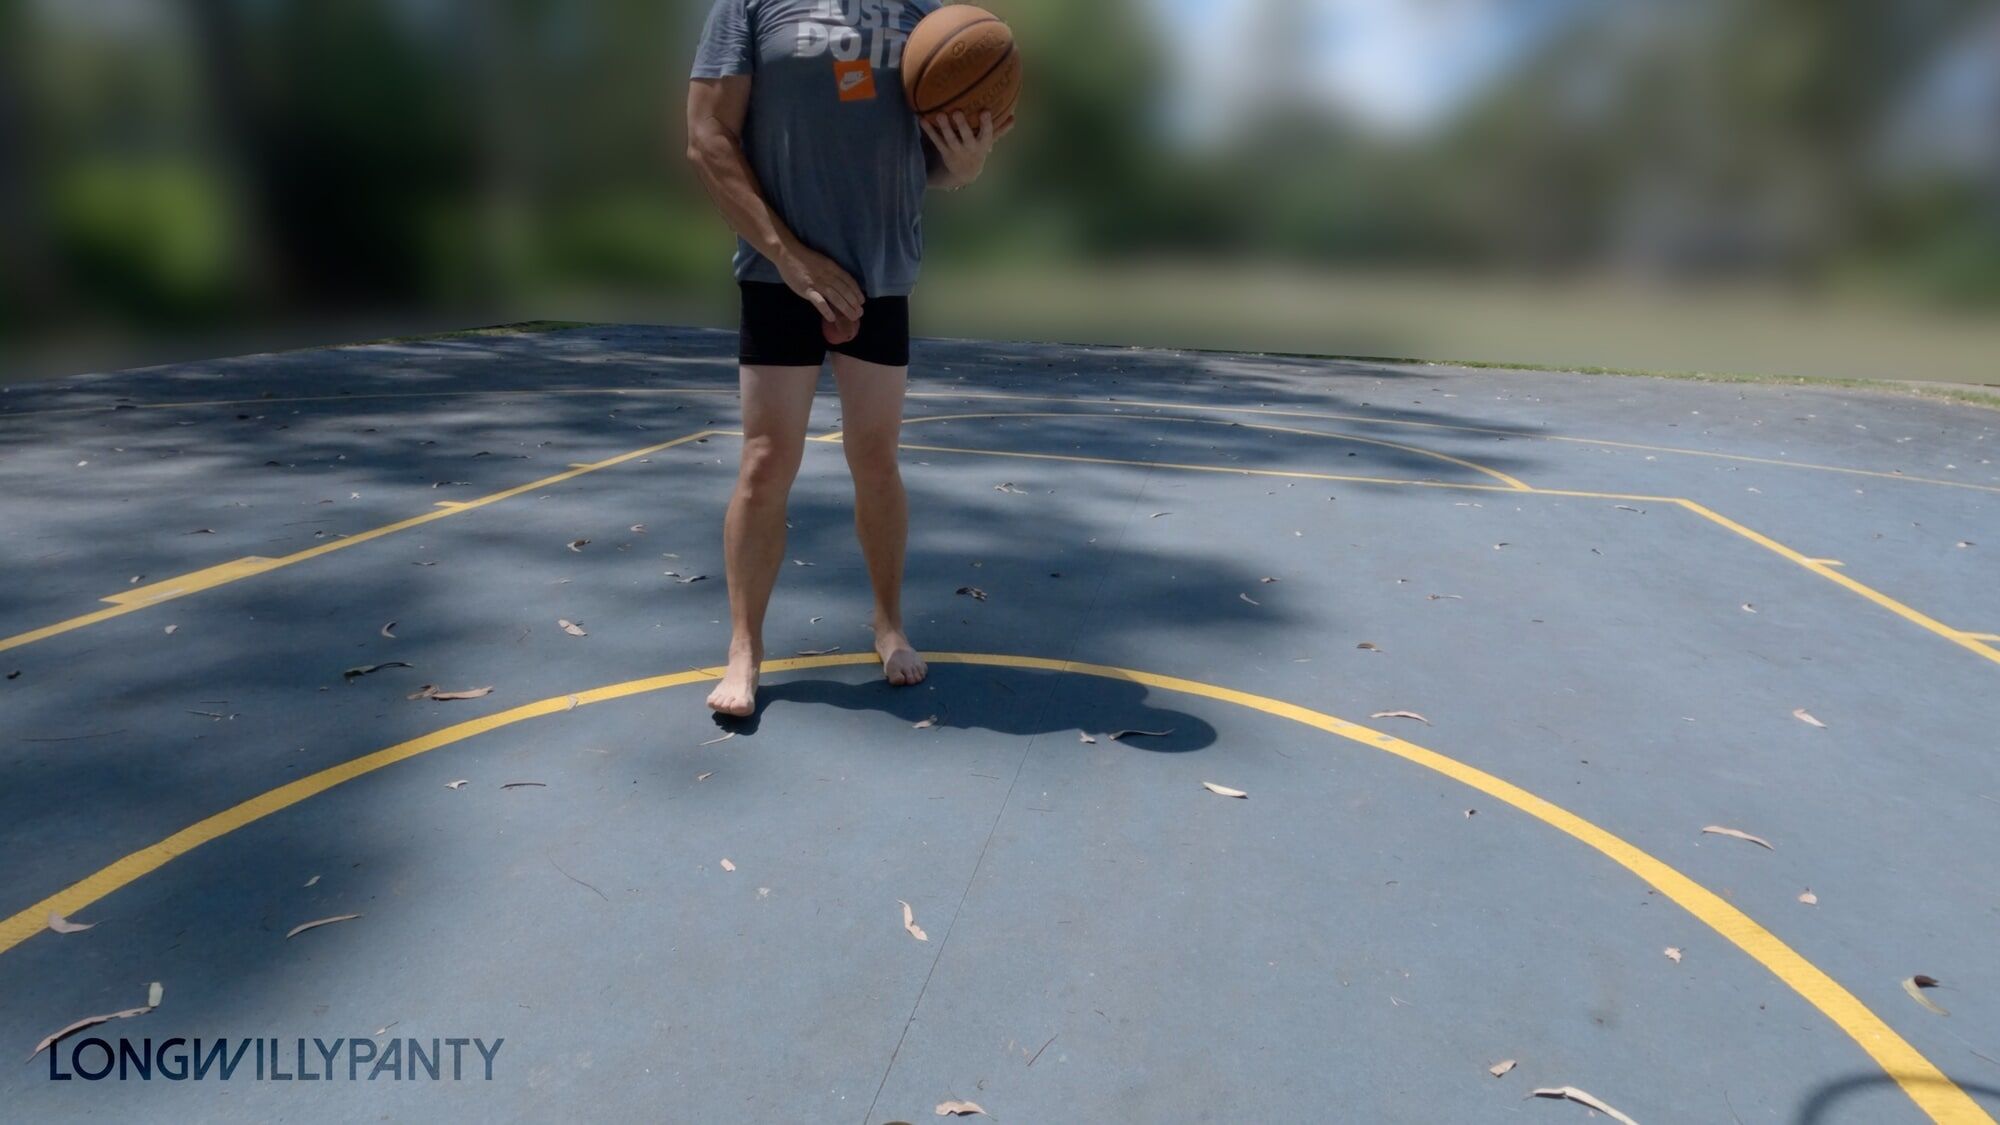 Cock out basketball - new location #3